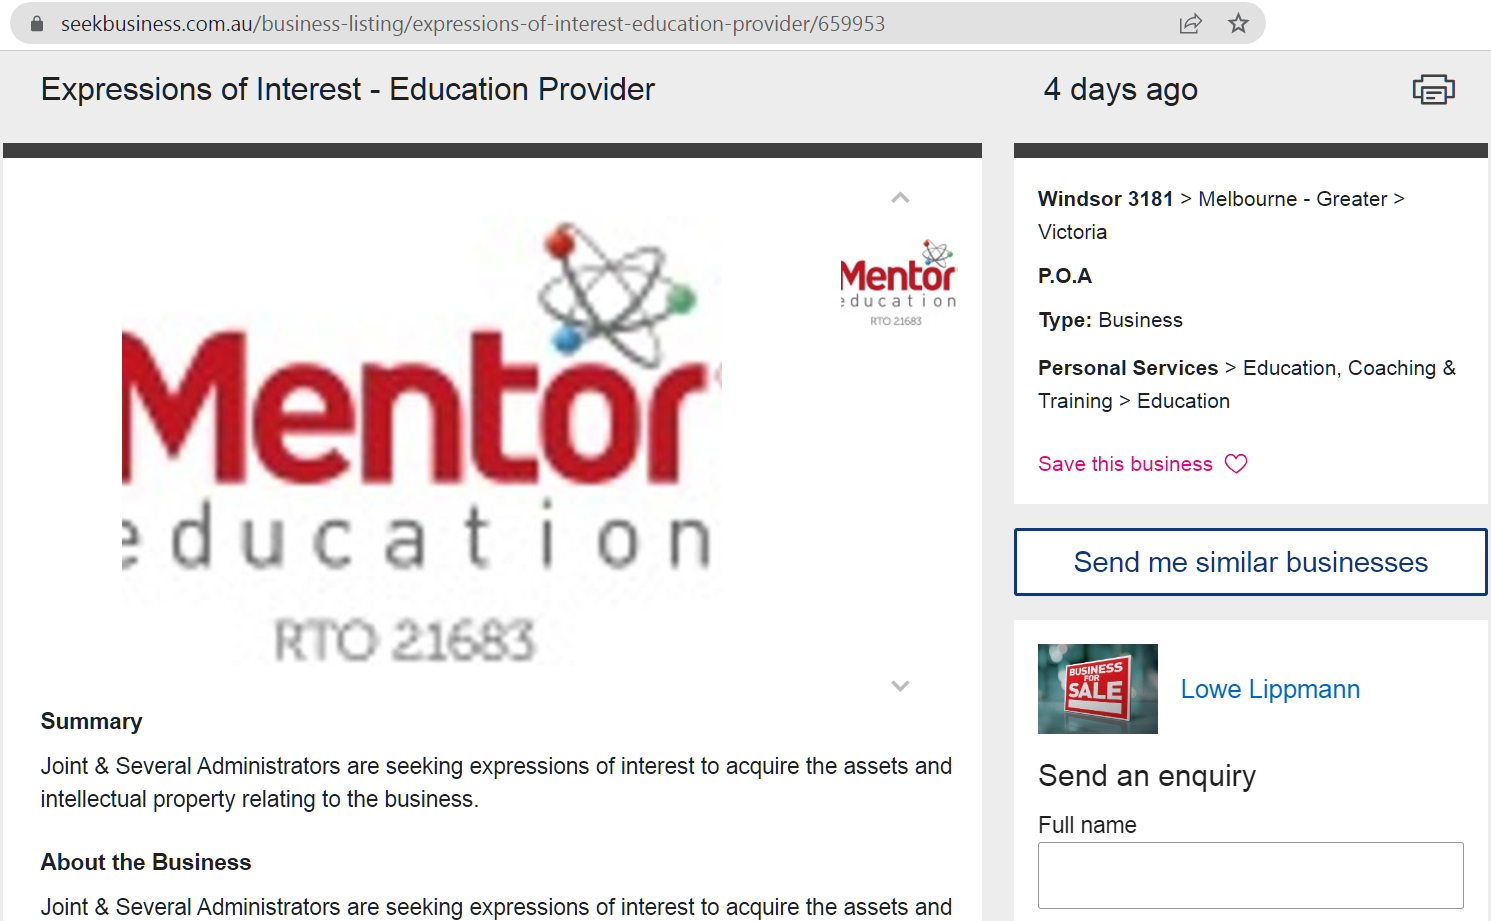 Mentor Education is going broke and is for sale at Seek Business